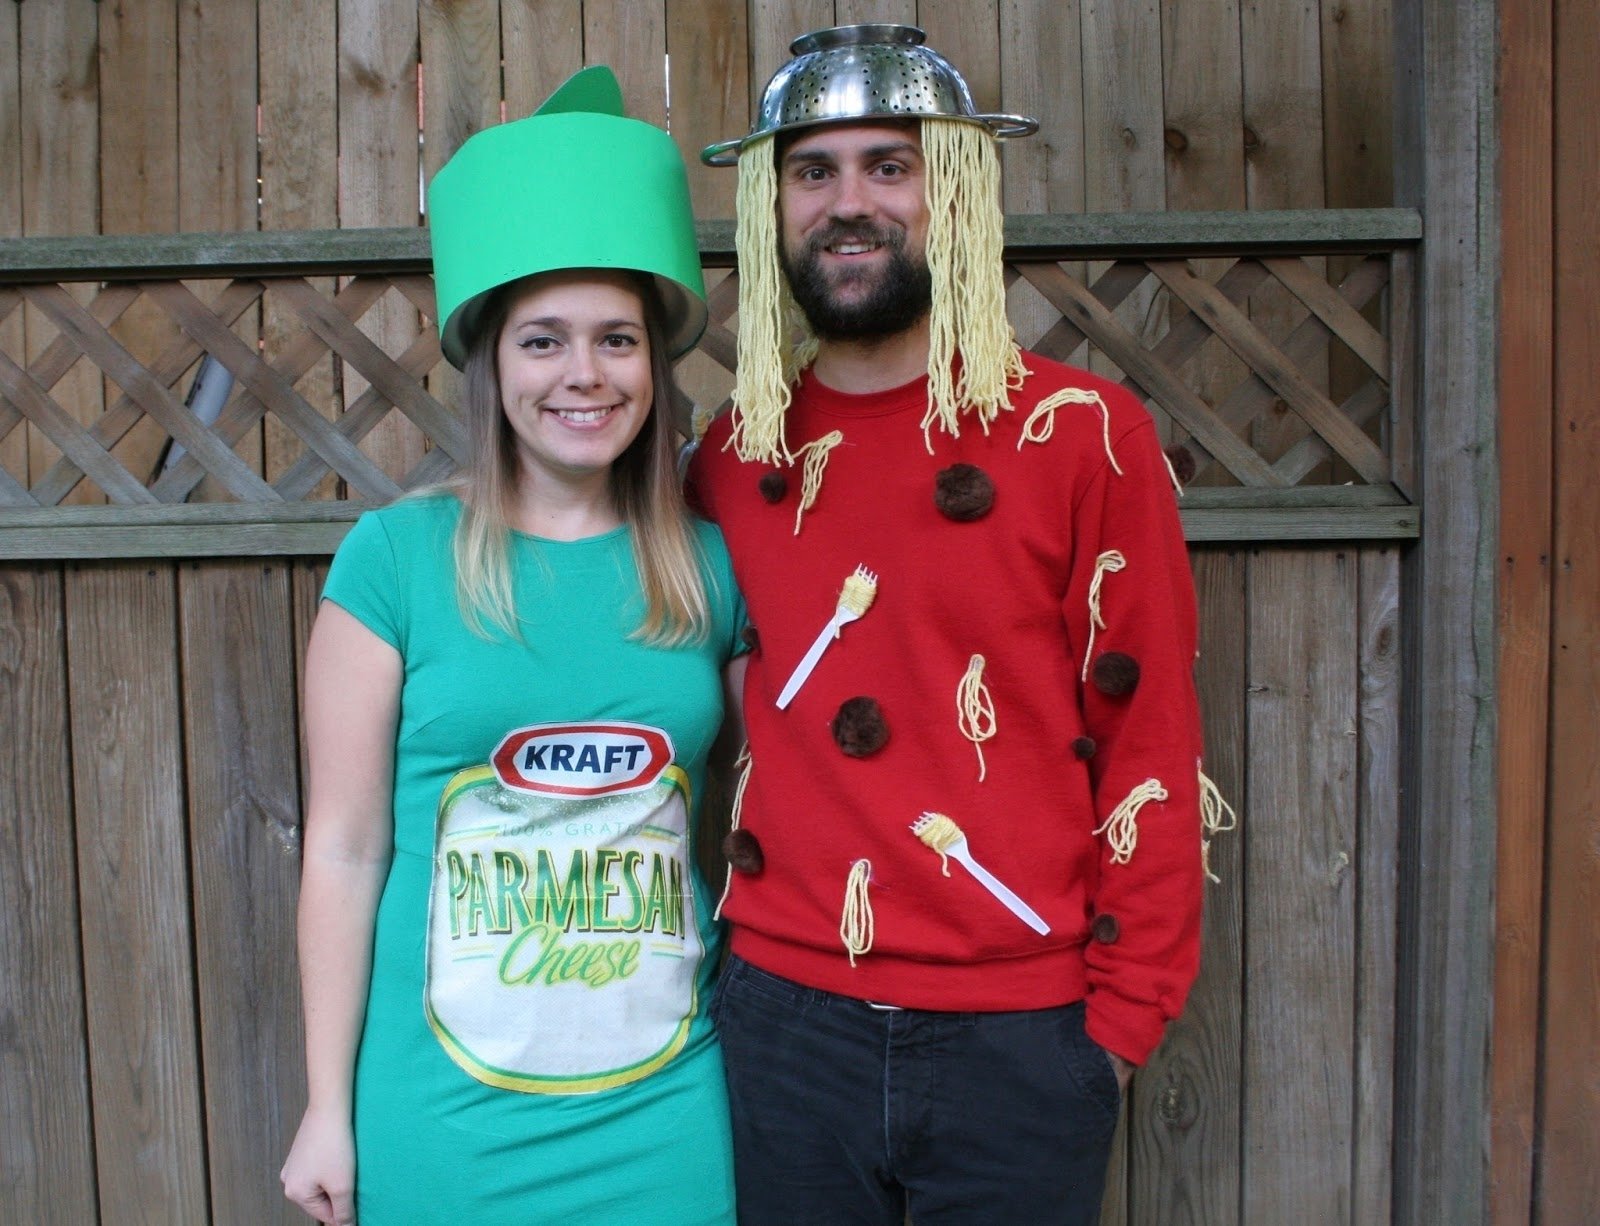 10 Most Recommended Girl Couple Halloween Costume Ideas our halloween costumes spaghetti parmesan cheese the surznick 4 2022